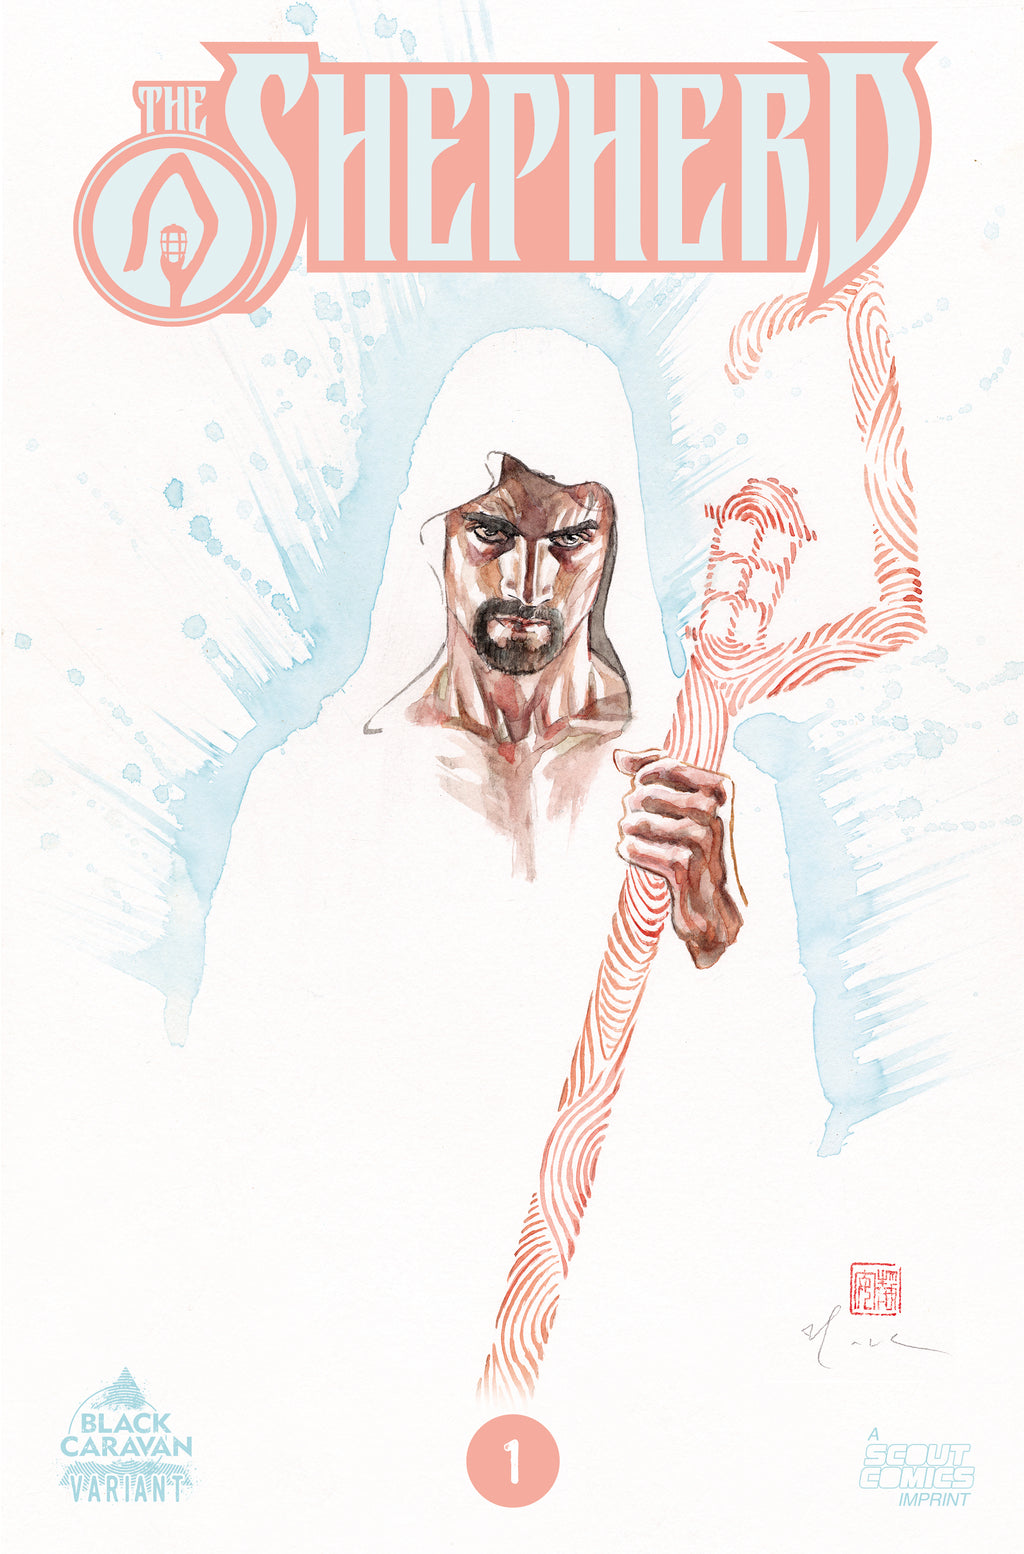 The Shepherd #1 - Retailer Incentive Cover